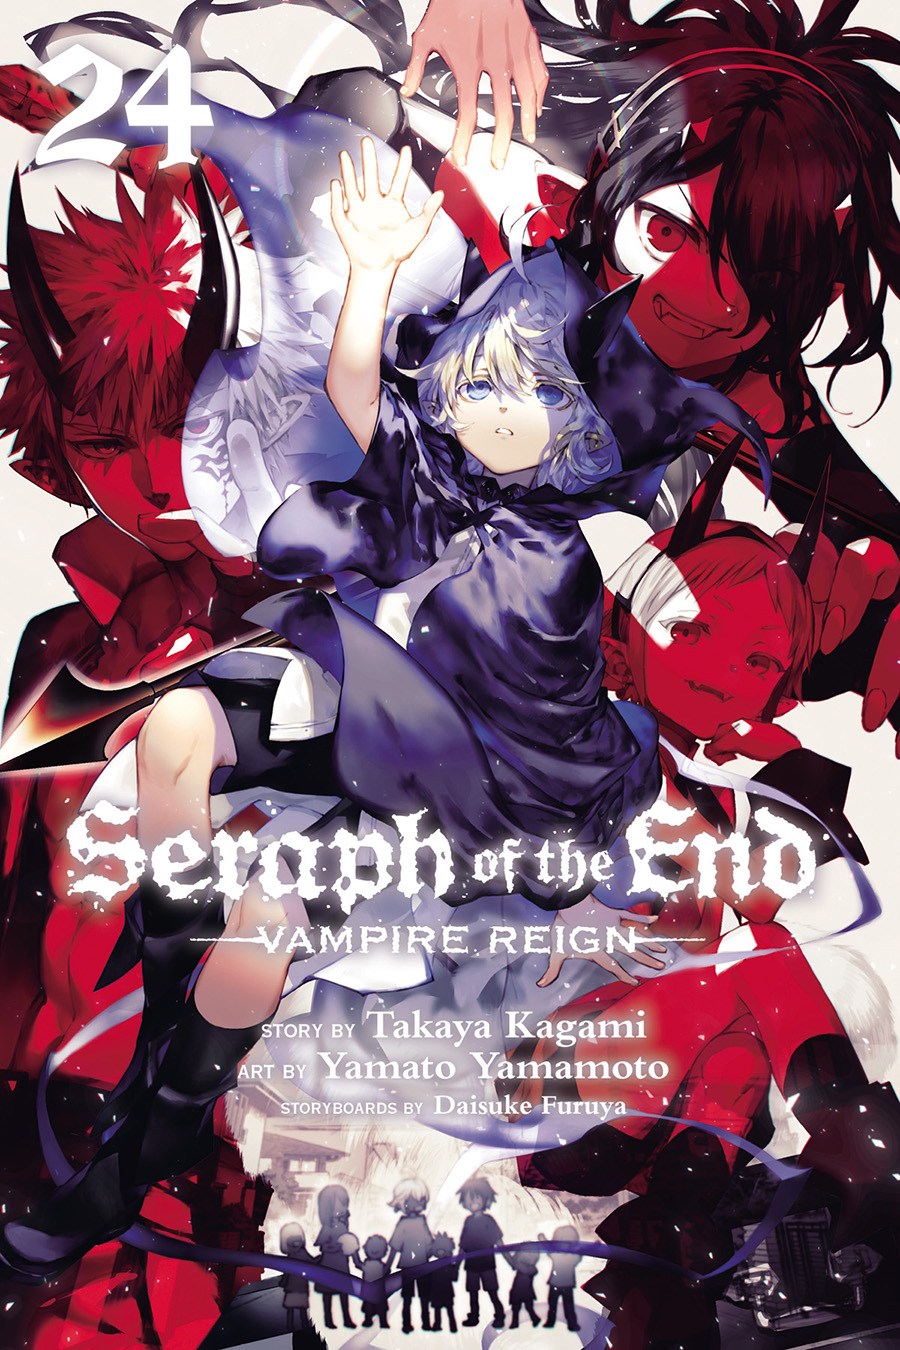 Seraph Of The End Vampire Reign Vol 24 TP